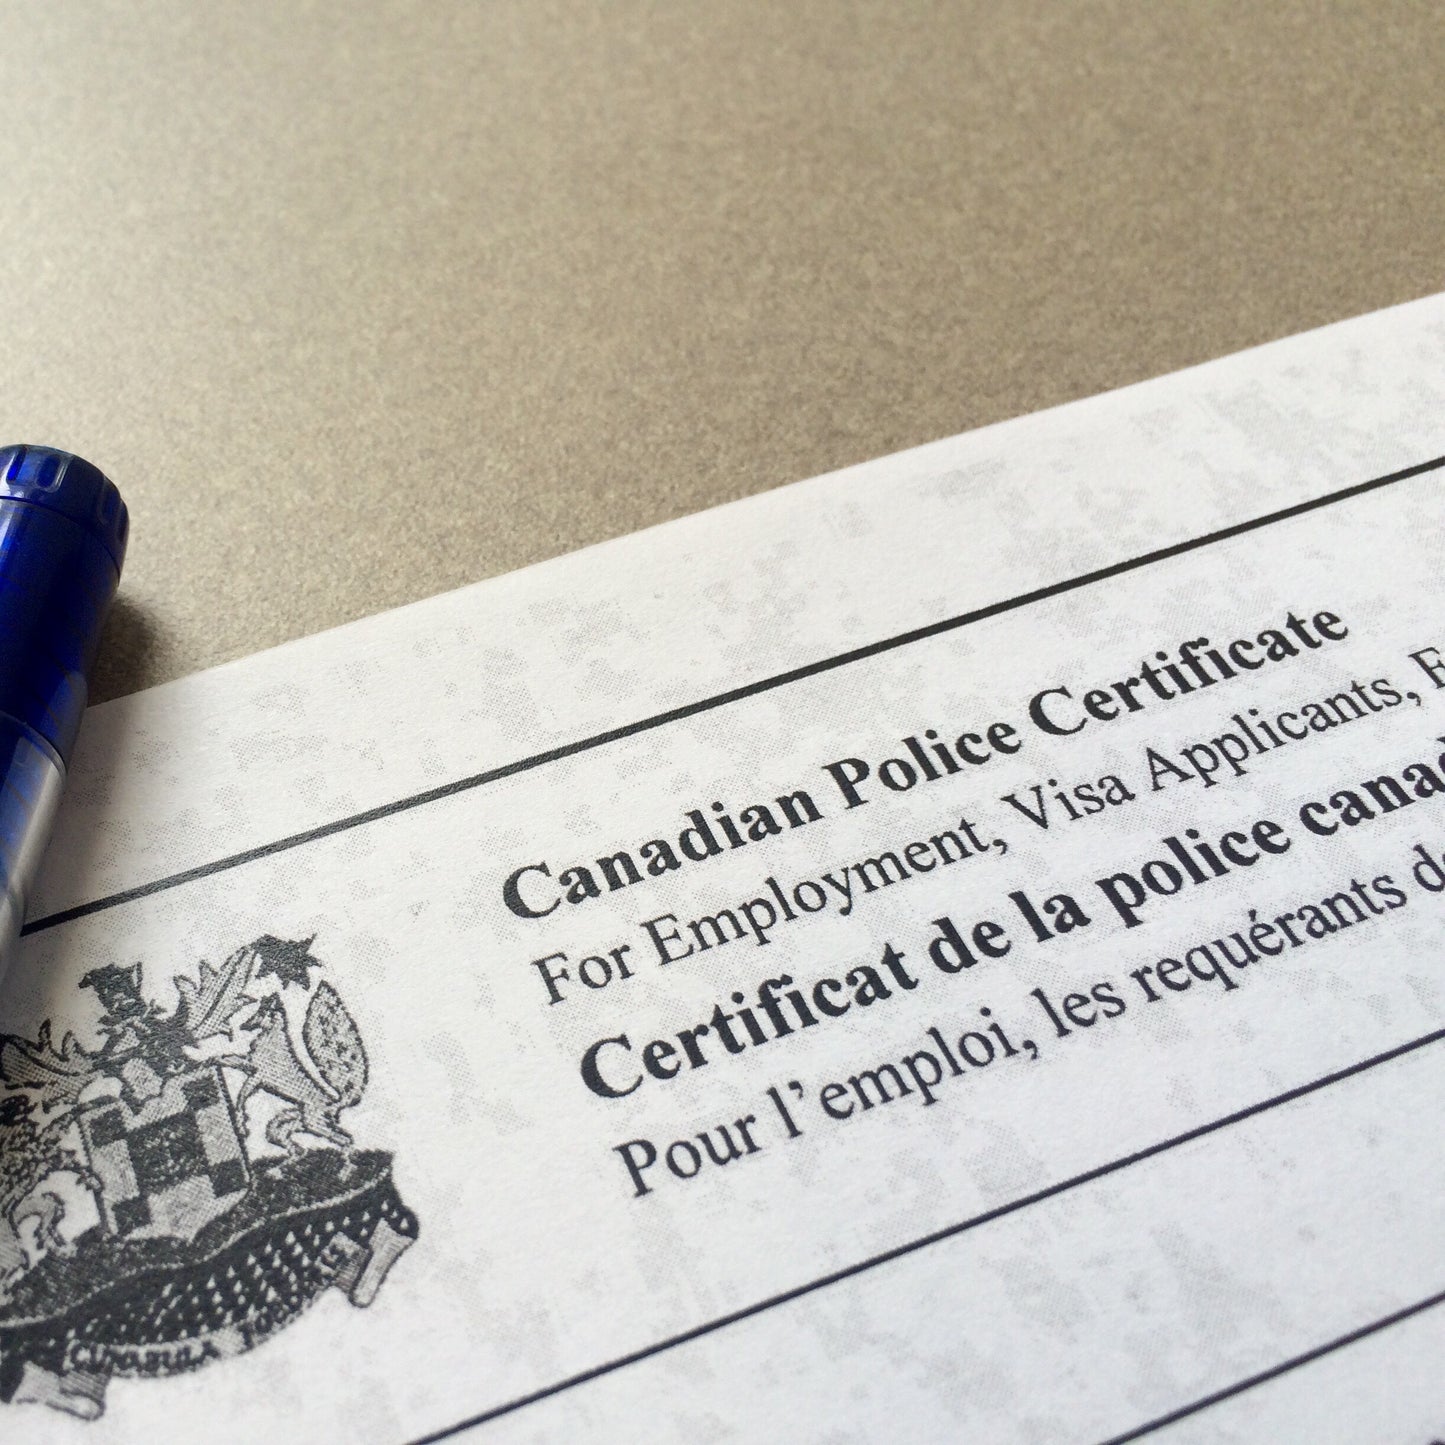 Police certificate/background check